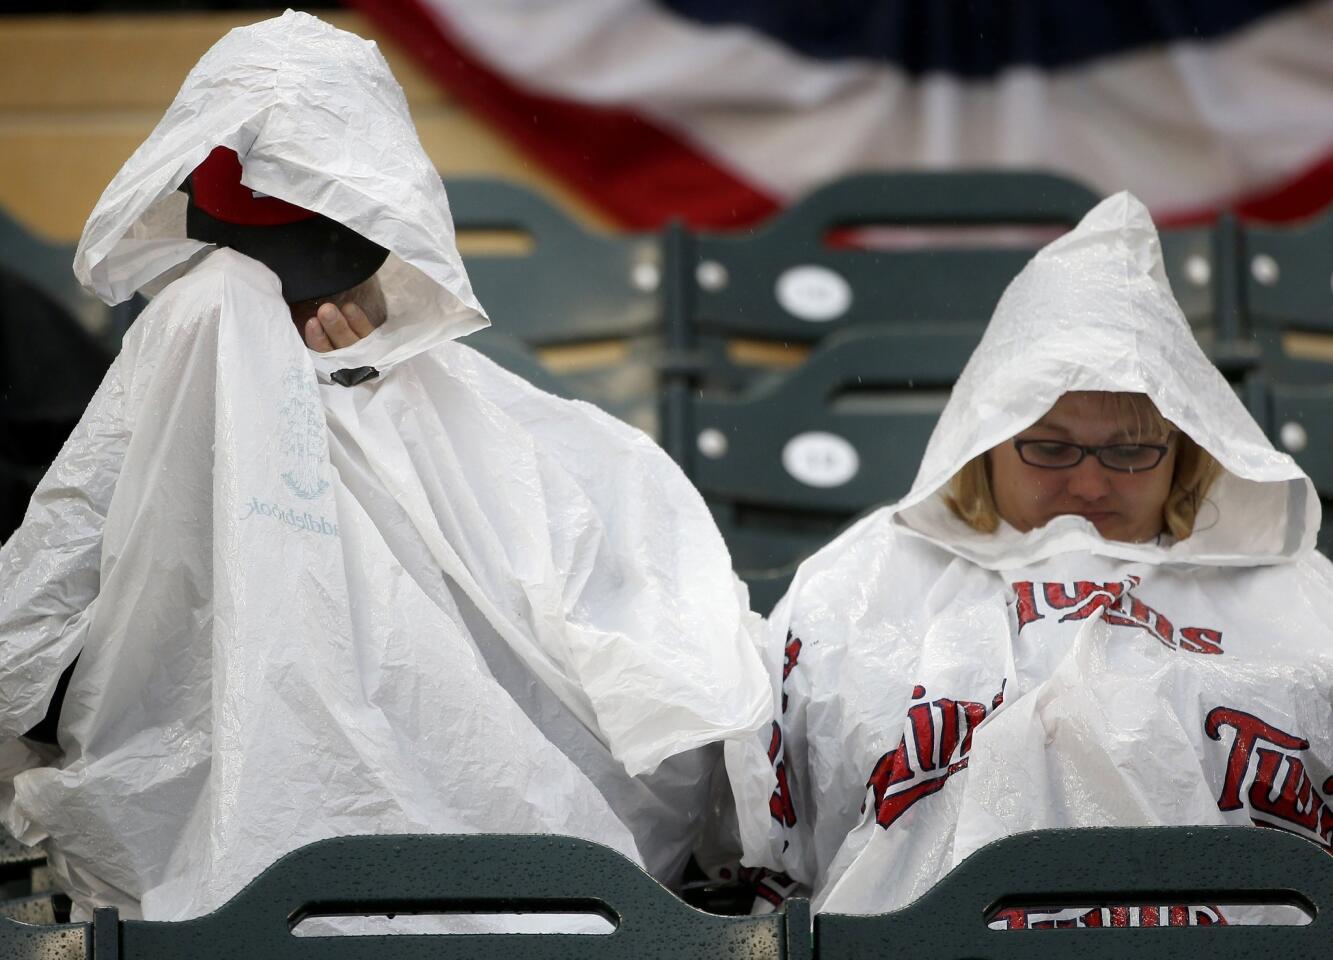 Fans huddled under ponchos in the stands at Target Field as rain delayed the start of the Home Run Derby 54 minutes on Monday.